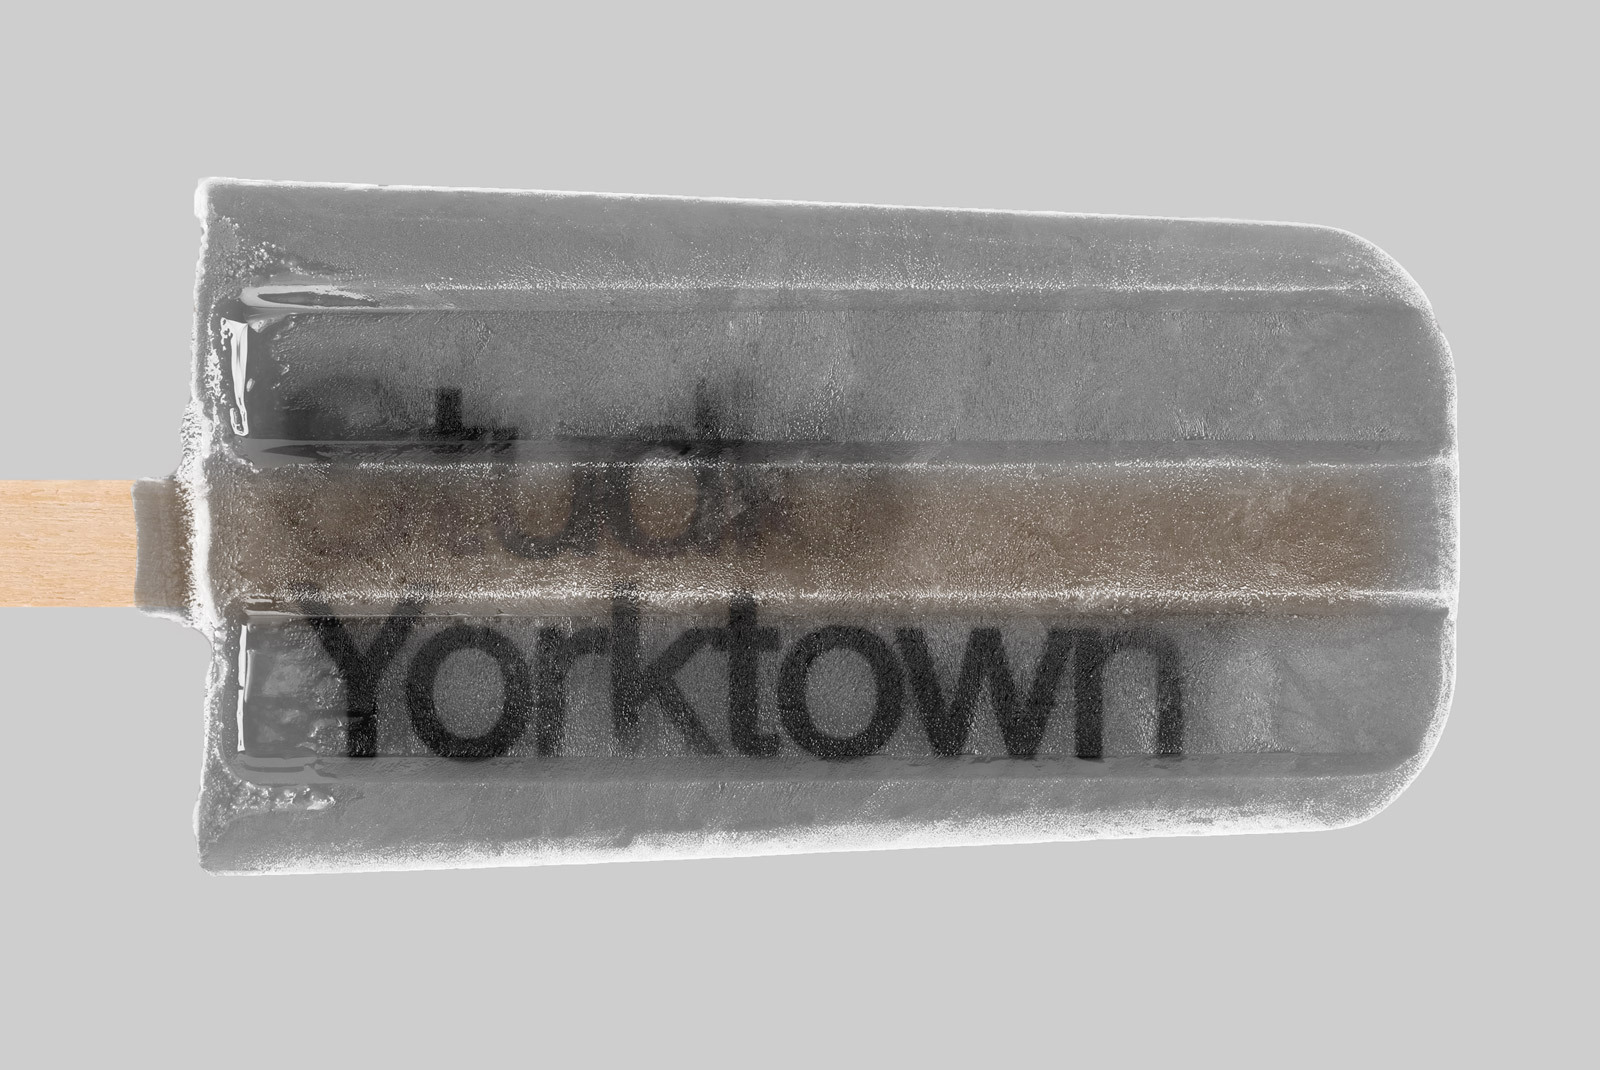 Ice pop with text "Yorktown" frozen inside, ideal for food mockups, advertising graphics, and frozen treat design templates.